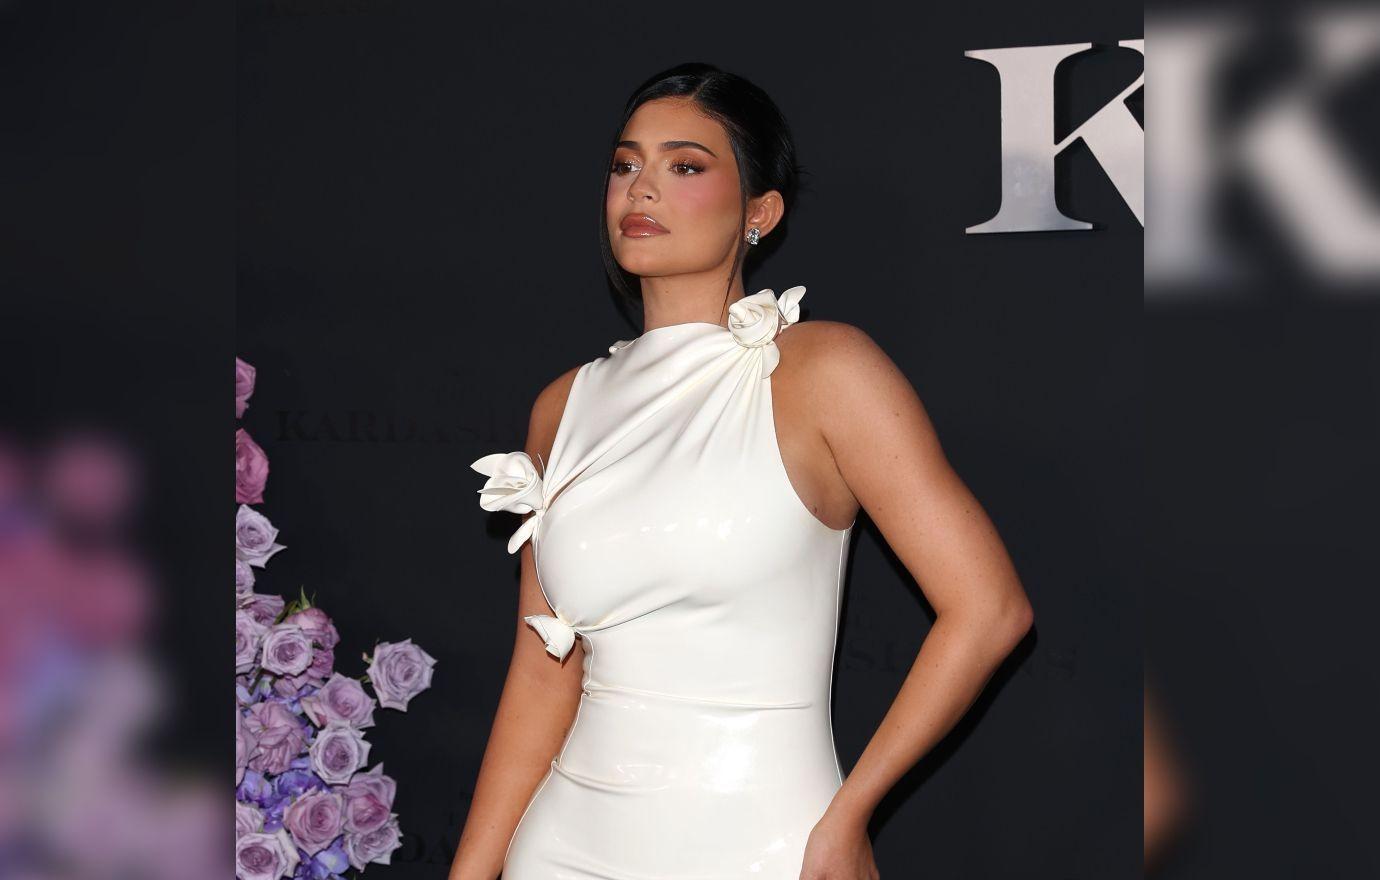 HOT DAMN! Sisters Kim Kardashian West, Kylie and Kendall Jenner drop a  limited-edition SKIMS lingerie line on Valentine's day